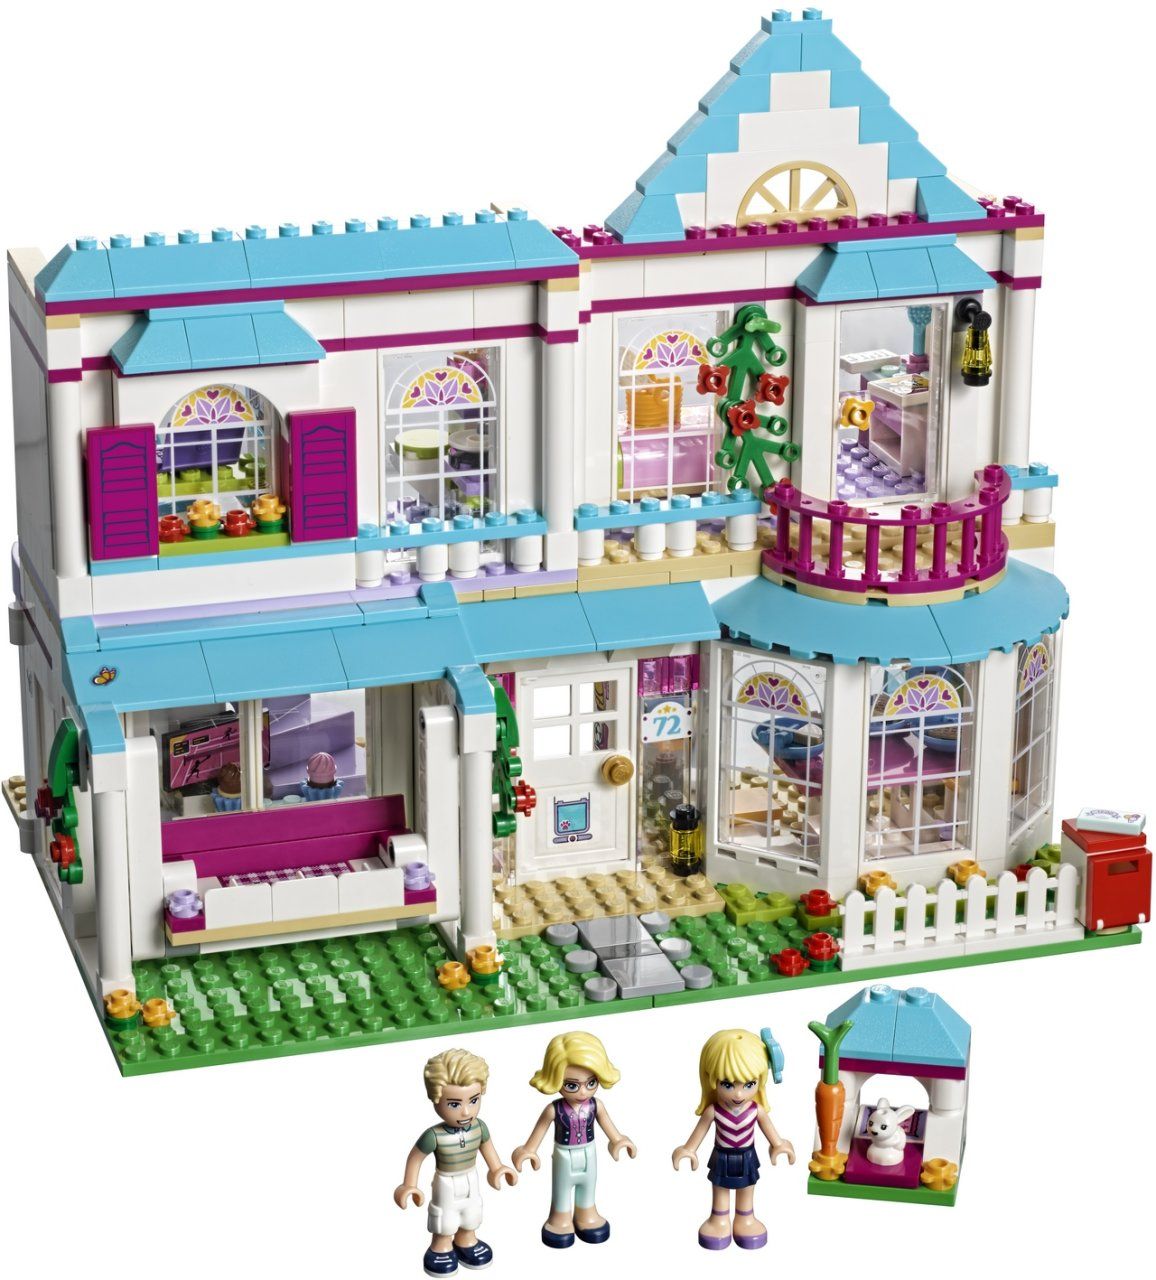 Lego Friends Дом Стефани